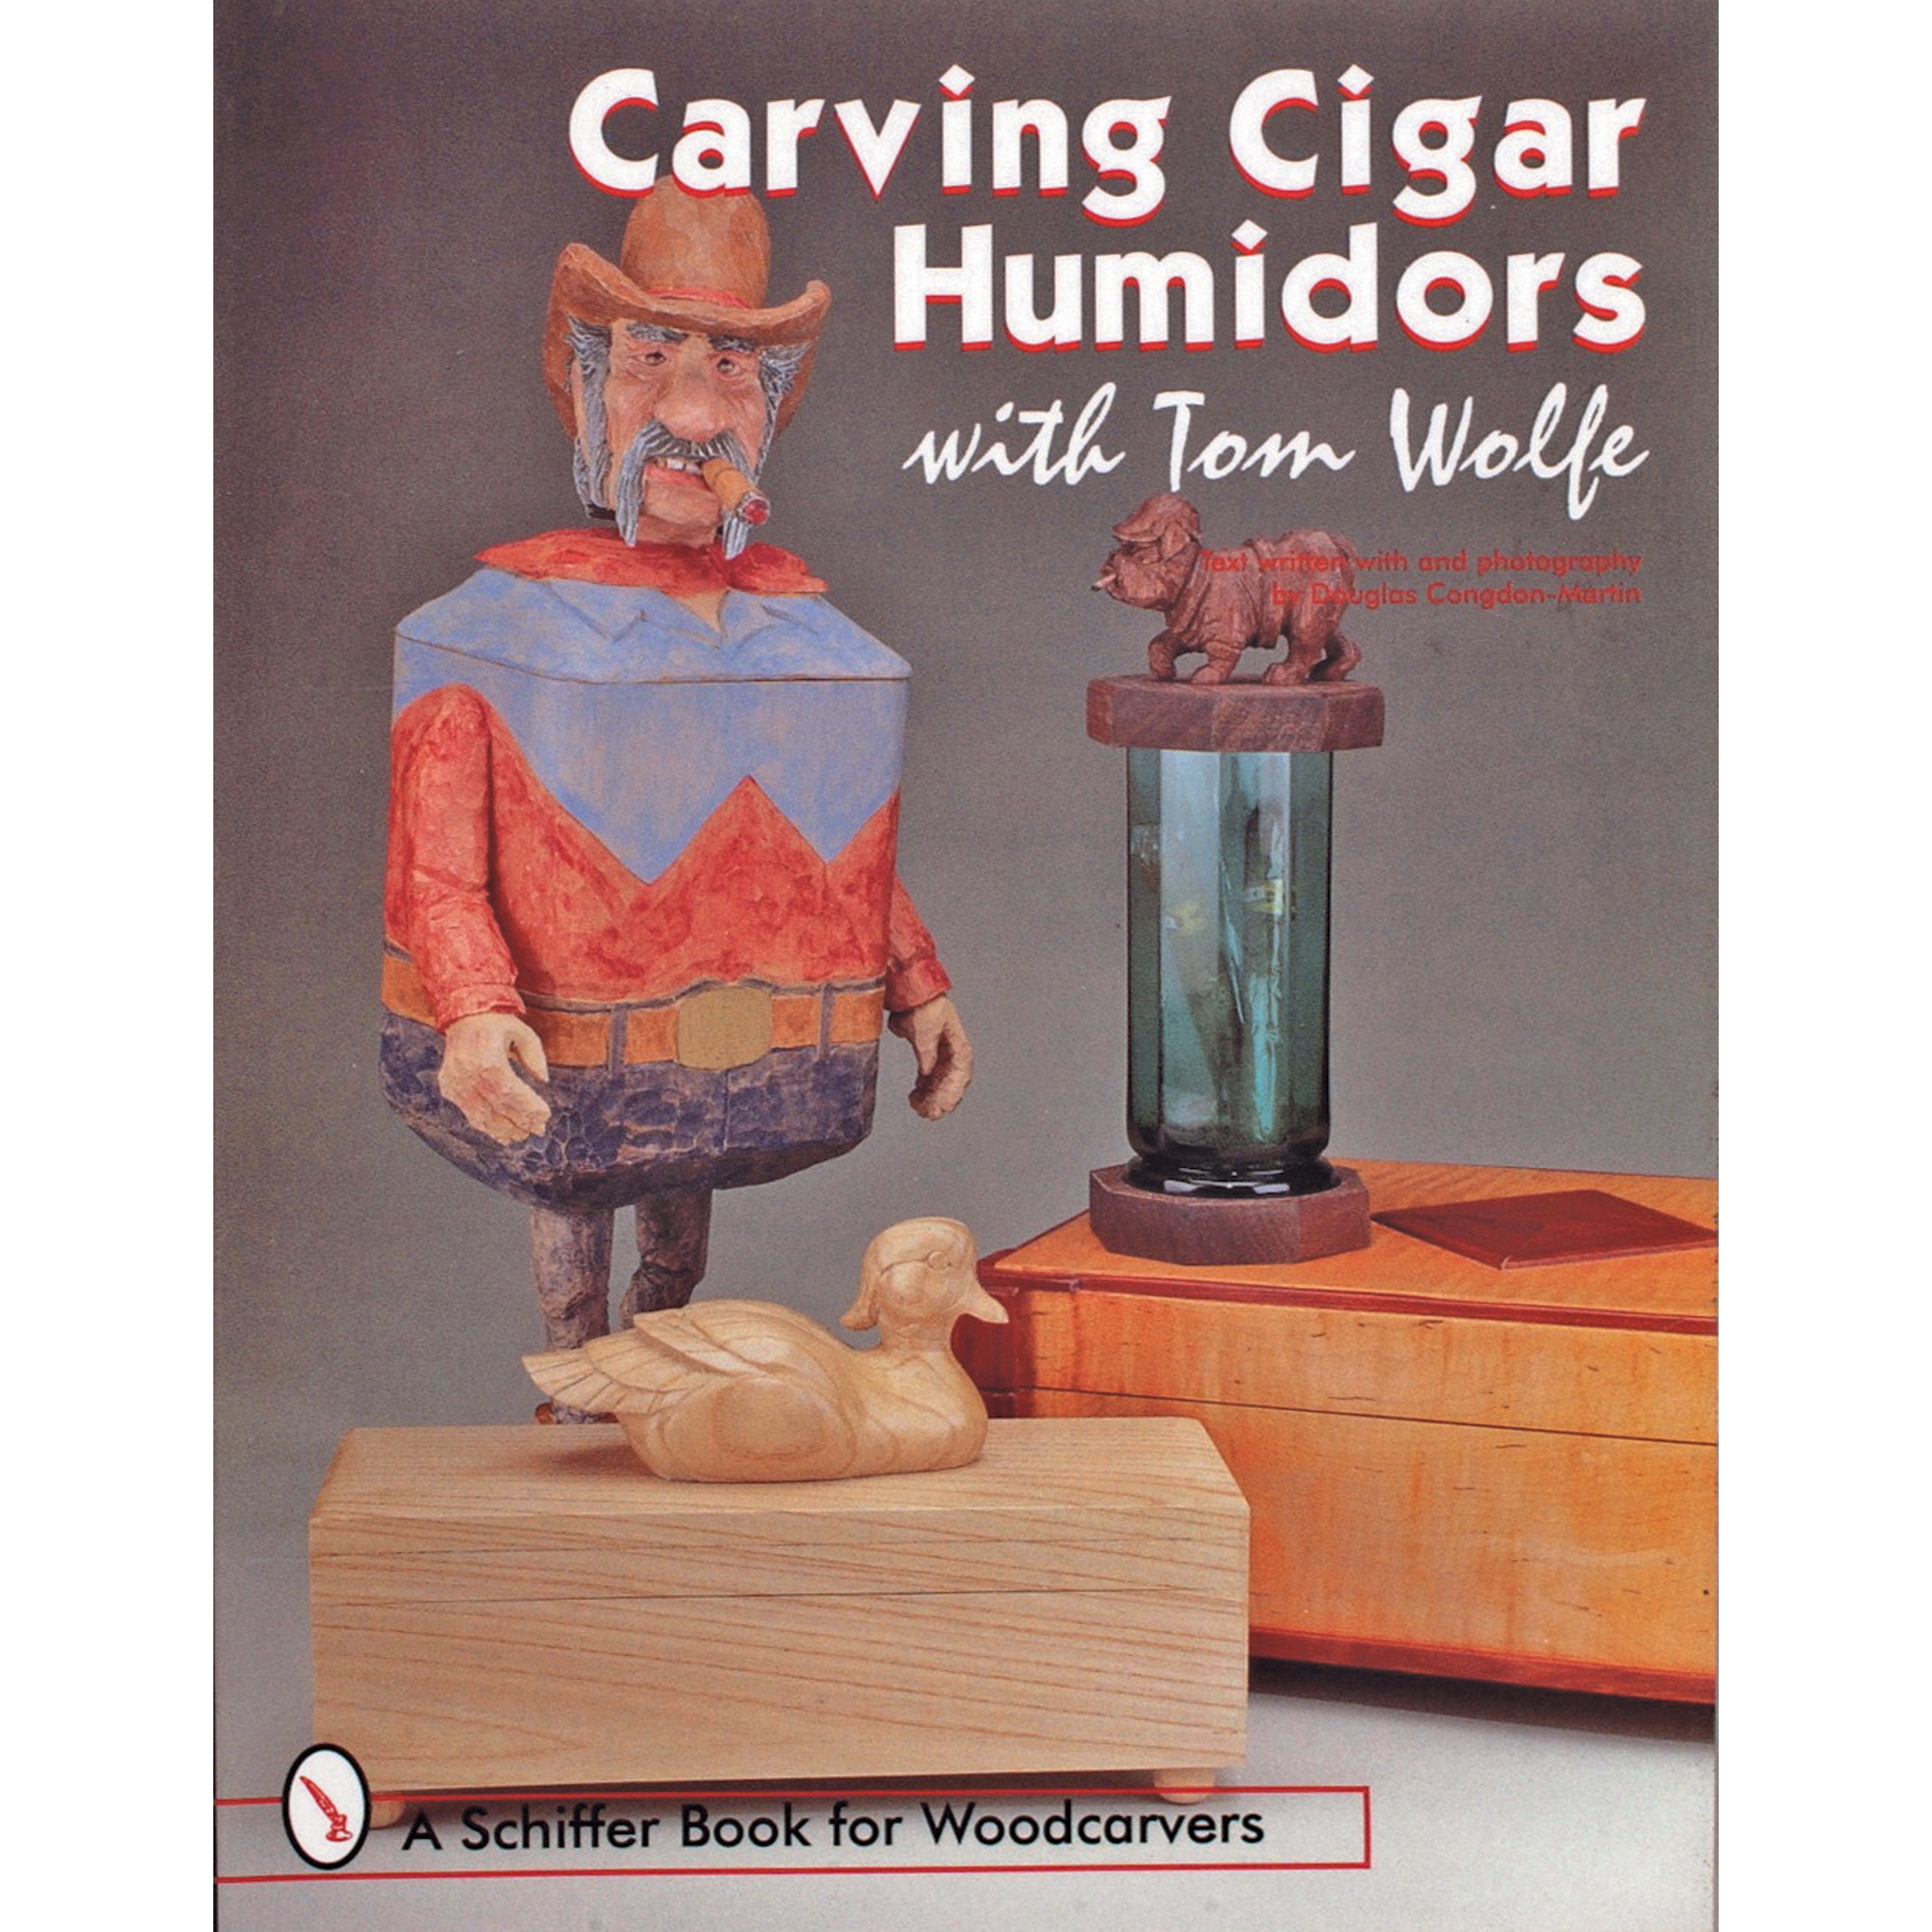 Carving Cigar Humidors With Tom Wolfe